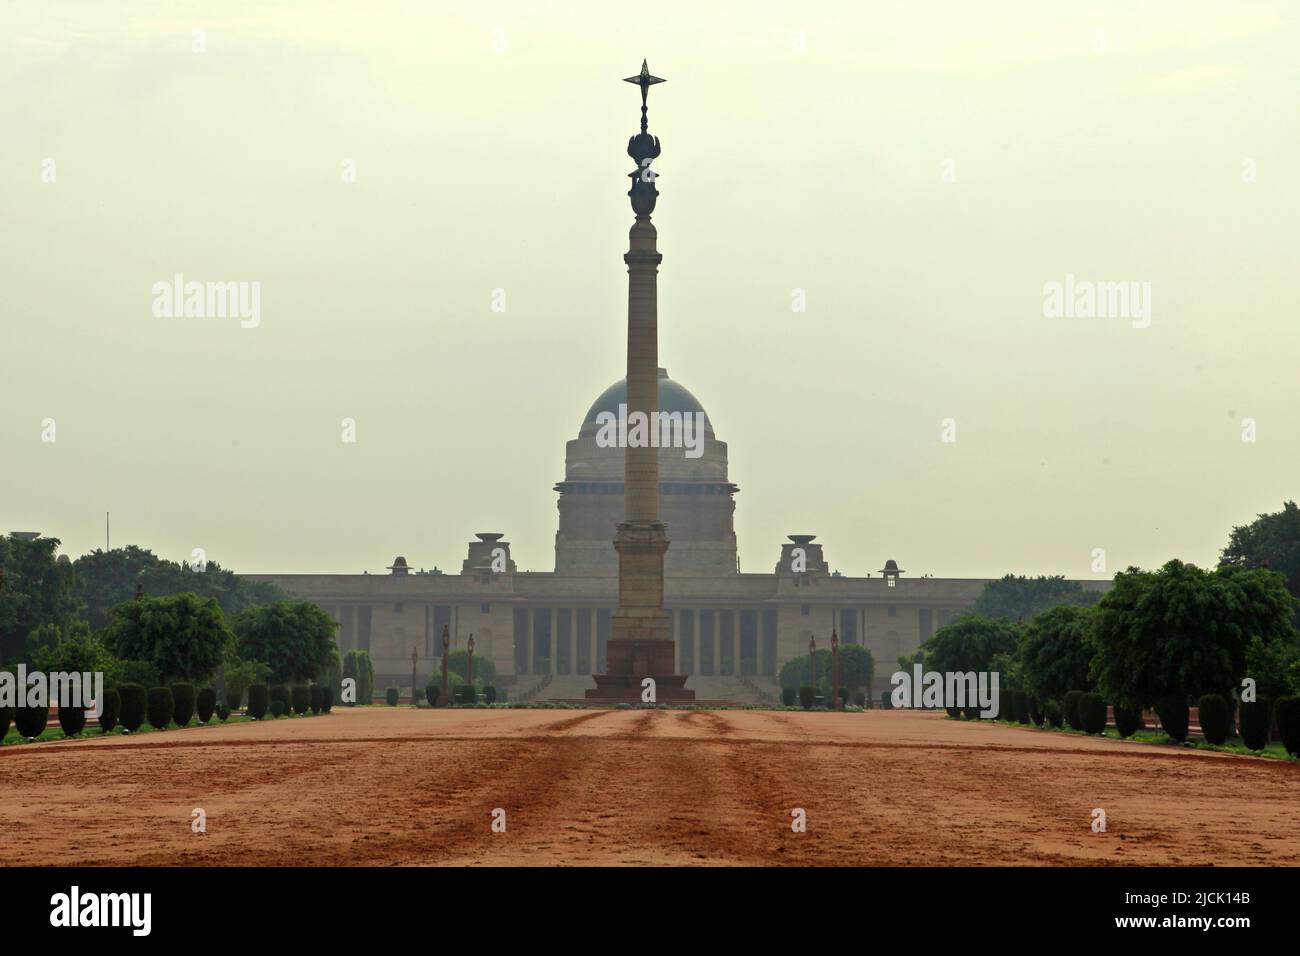 Jaipur column in the courtyard with Rashtrapati Bhavan, the official residence of President of India, is in the background in New Delhi, Delhi, India. Stock Photo